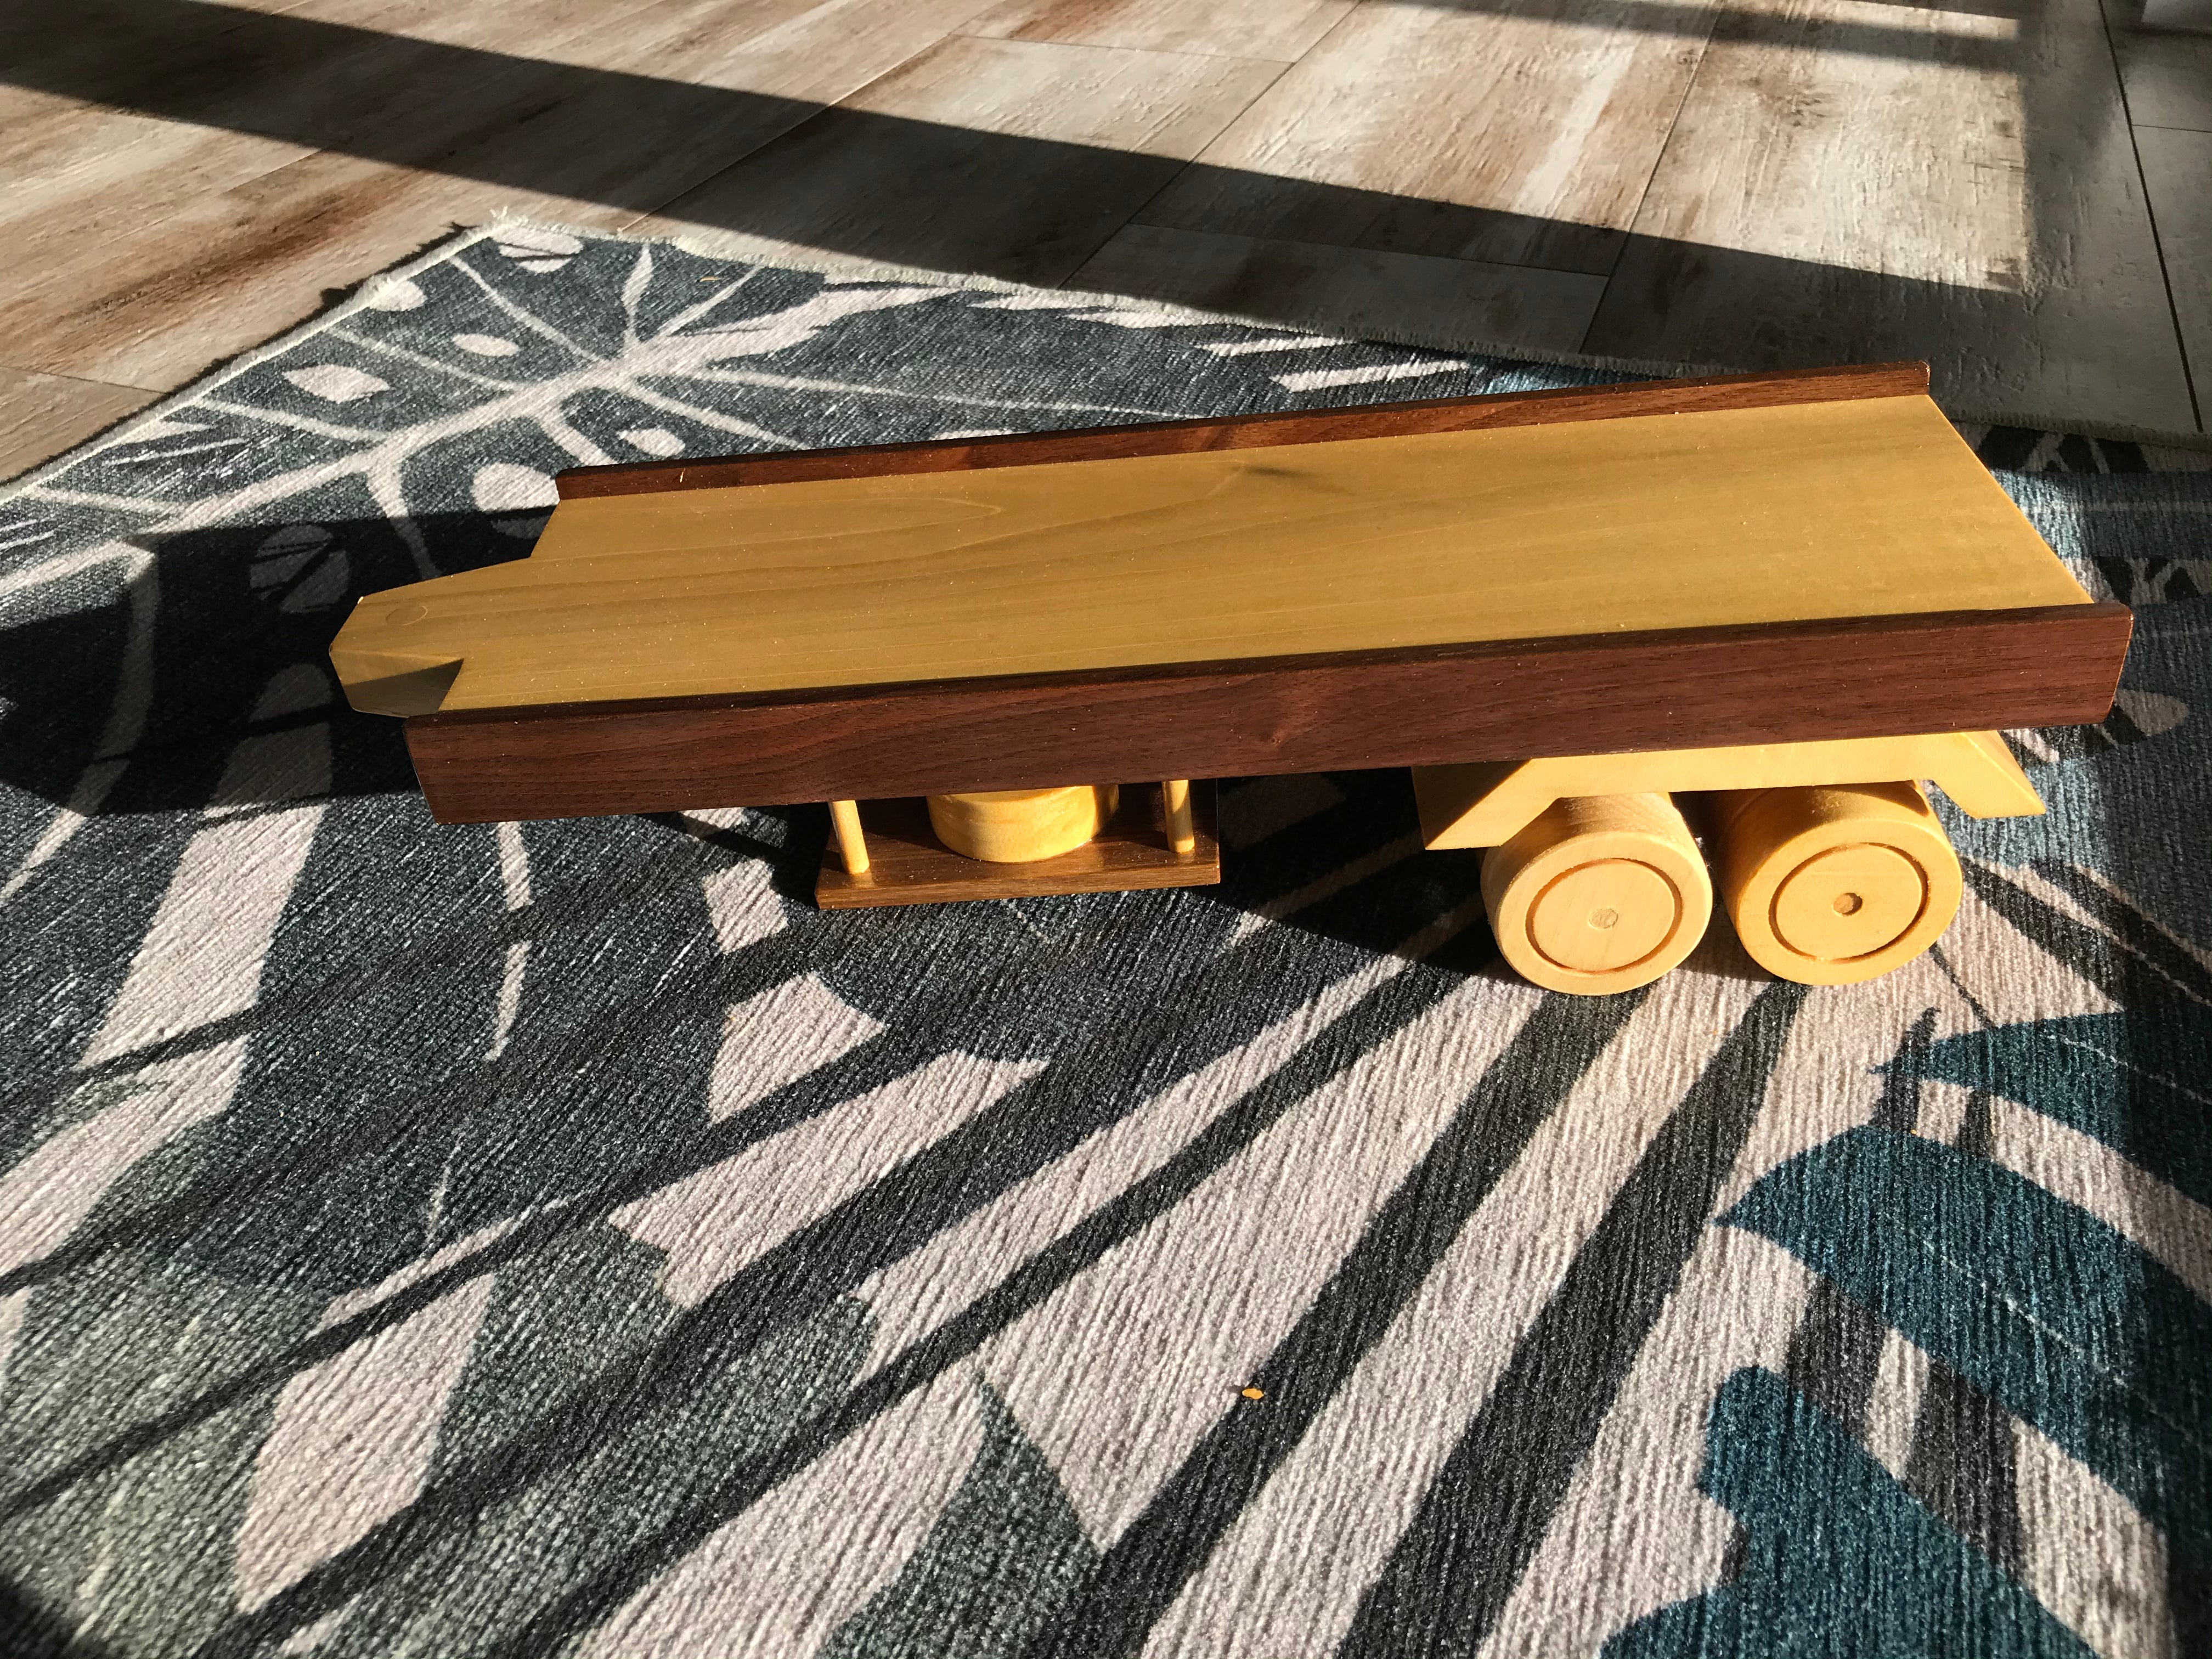 Amish Handmade Wooden Toy Flatbed Truck with Skids from DutchCrafters